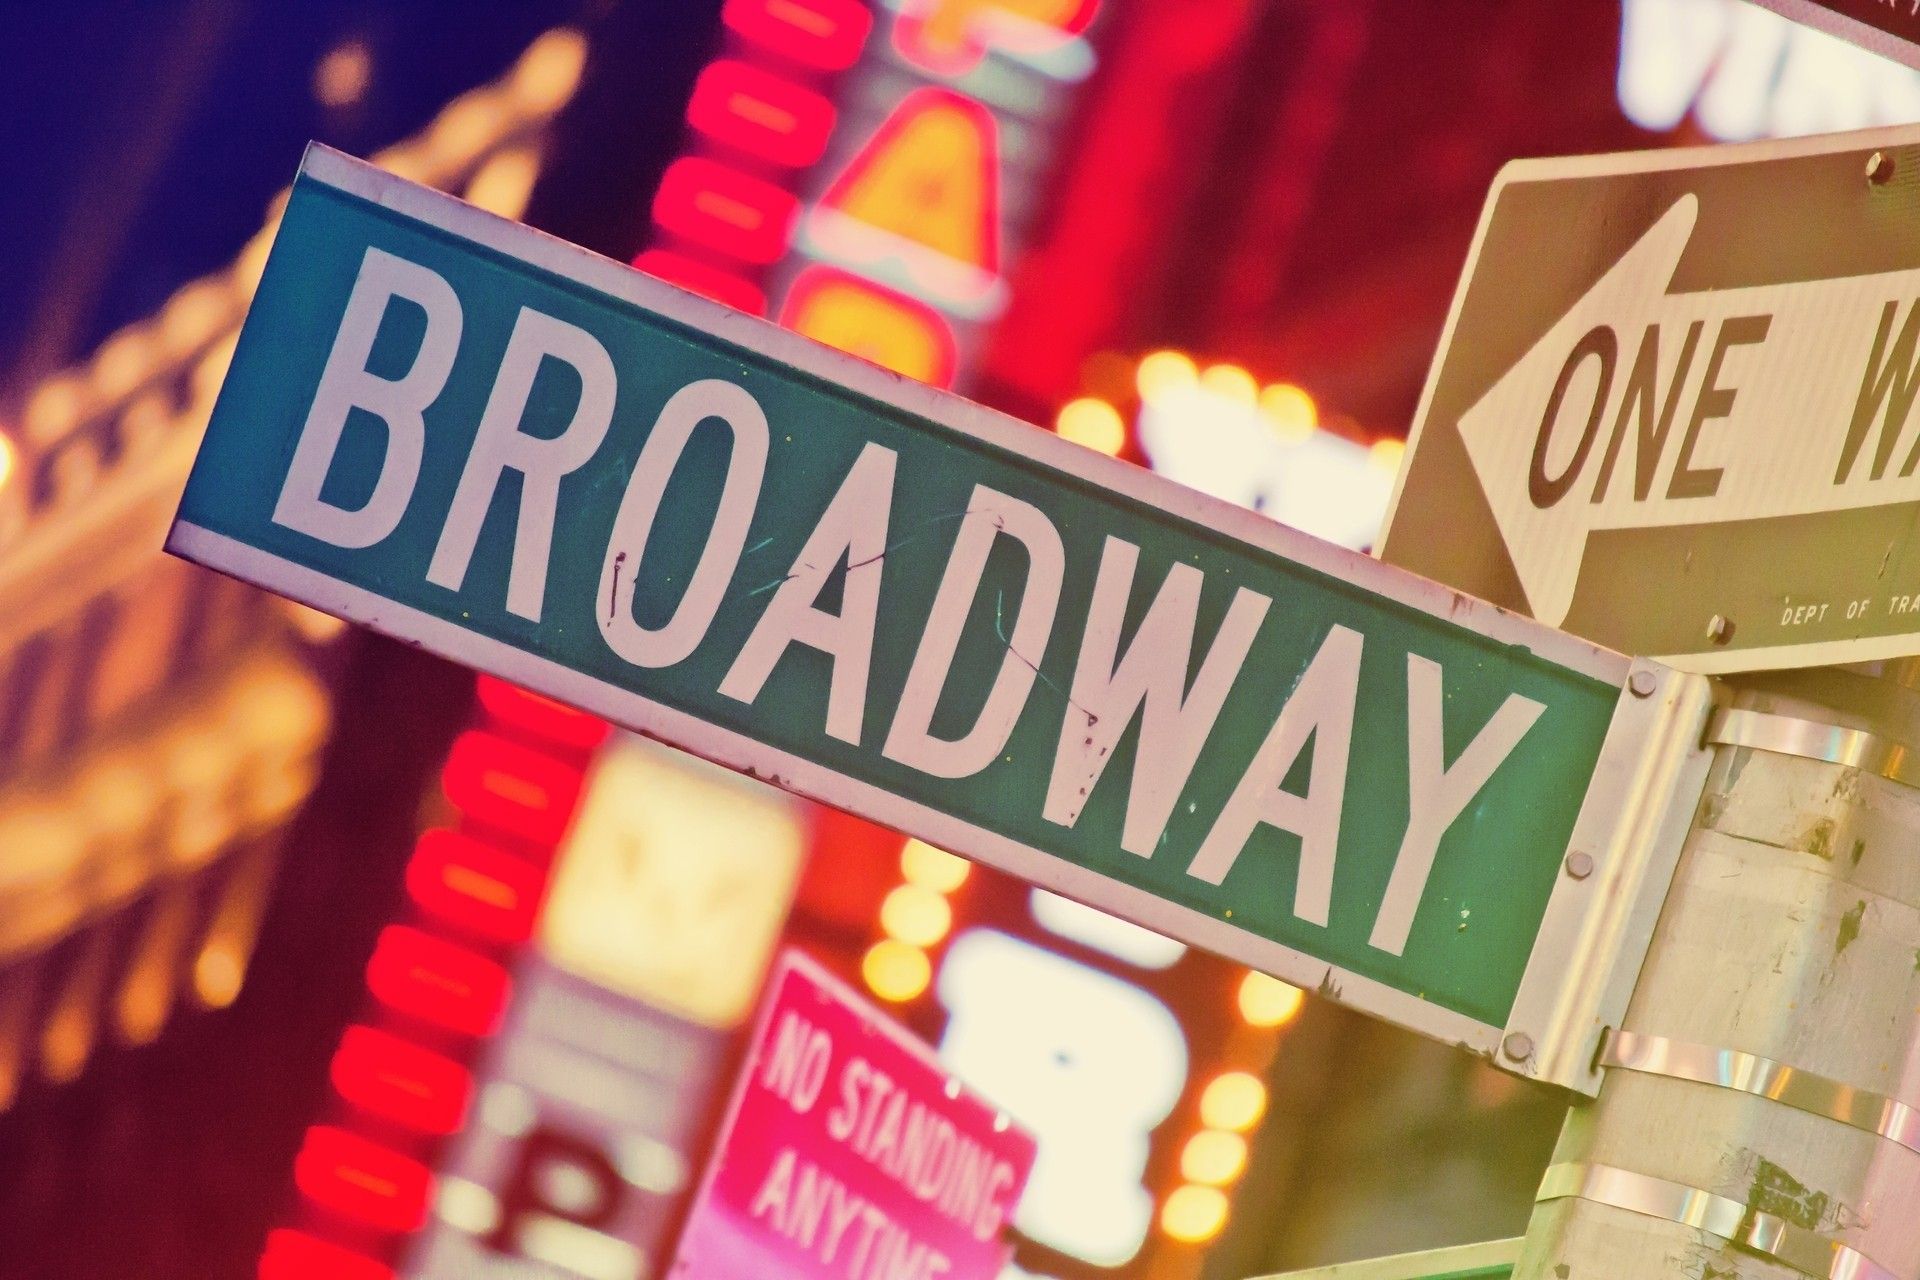 Broadway Background and Image (41).SCB (2022)